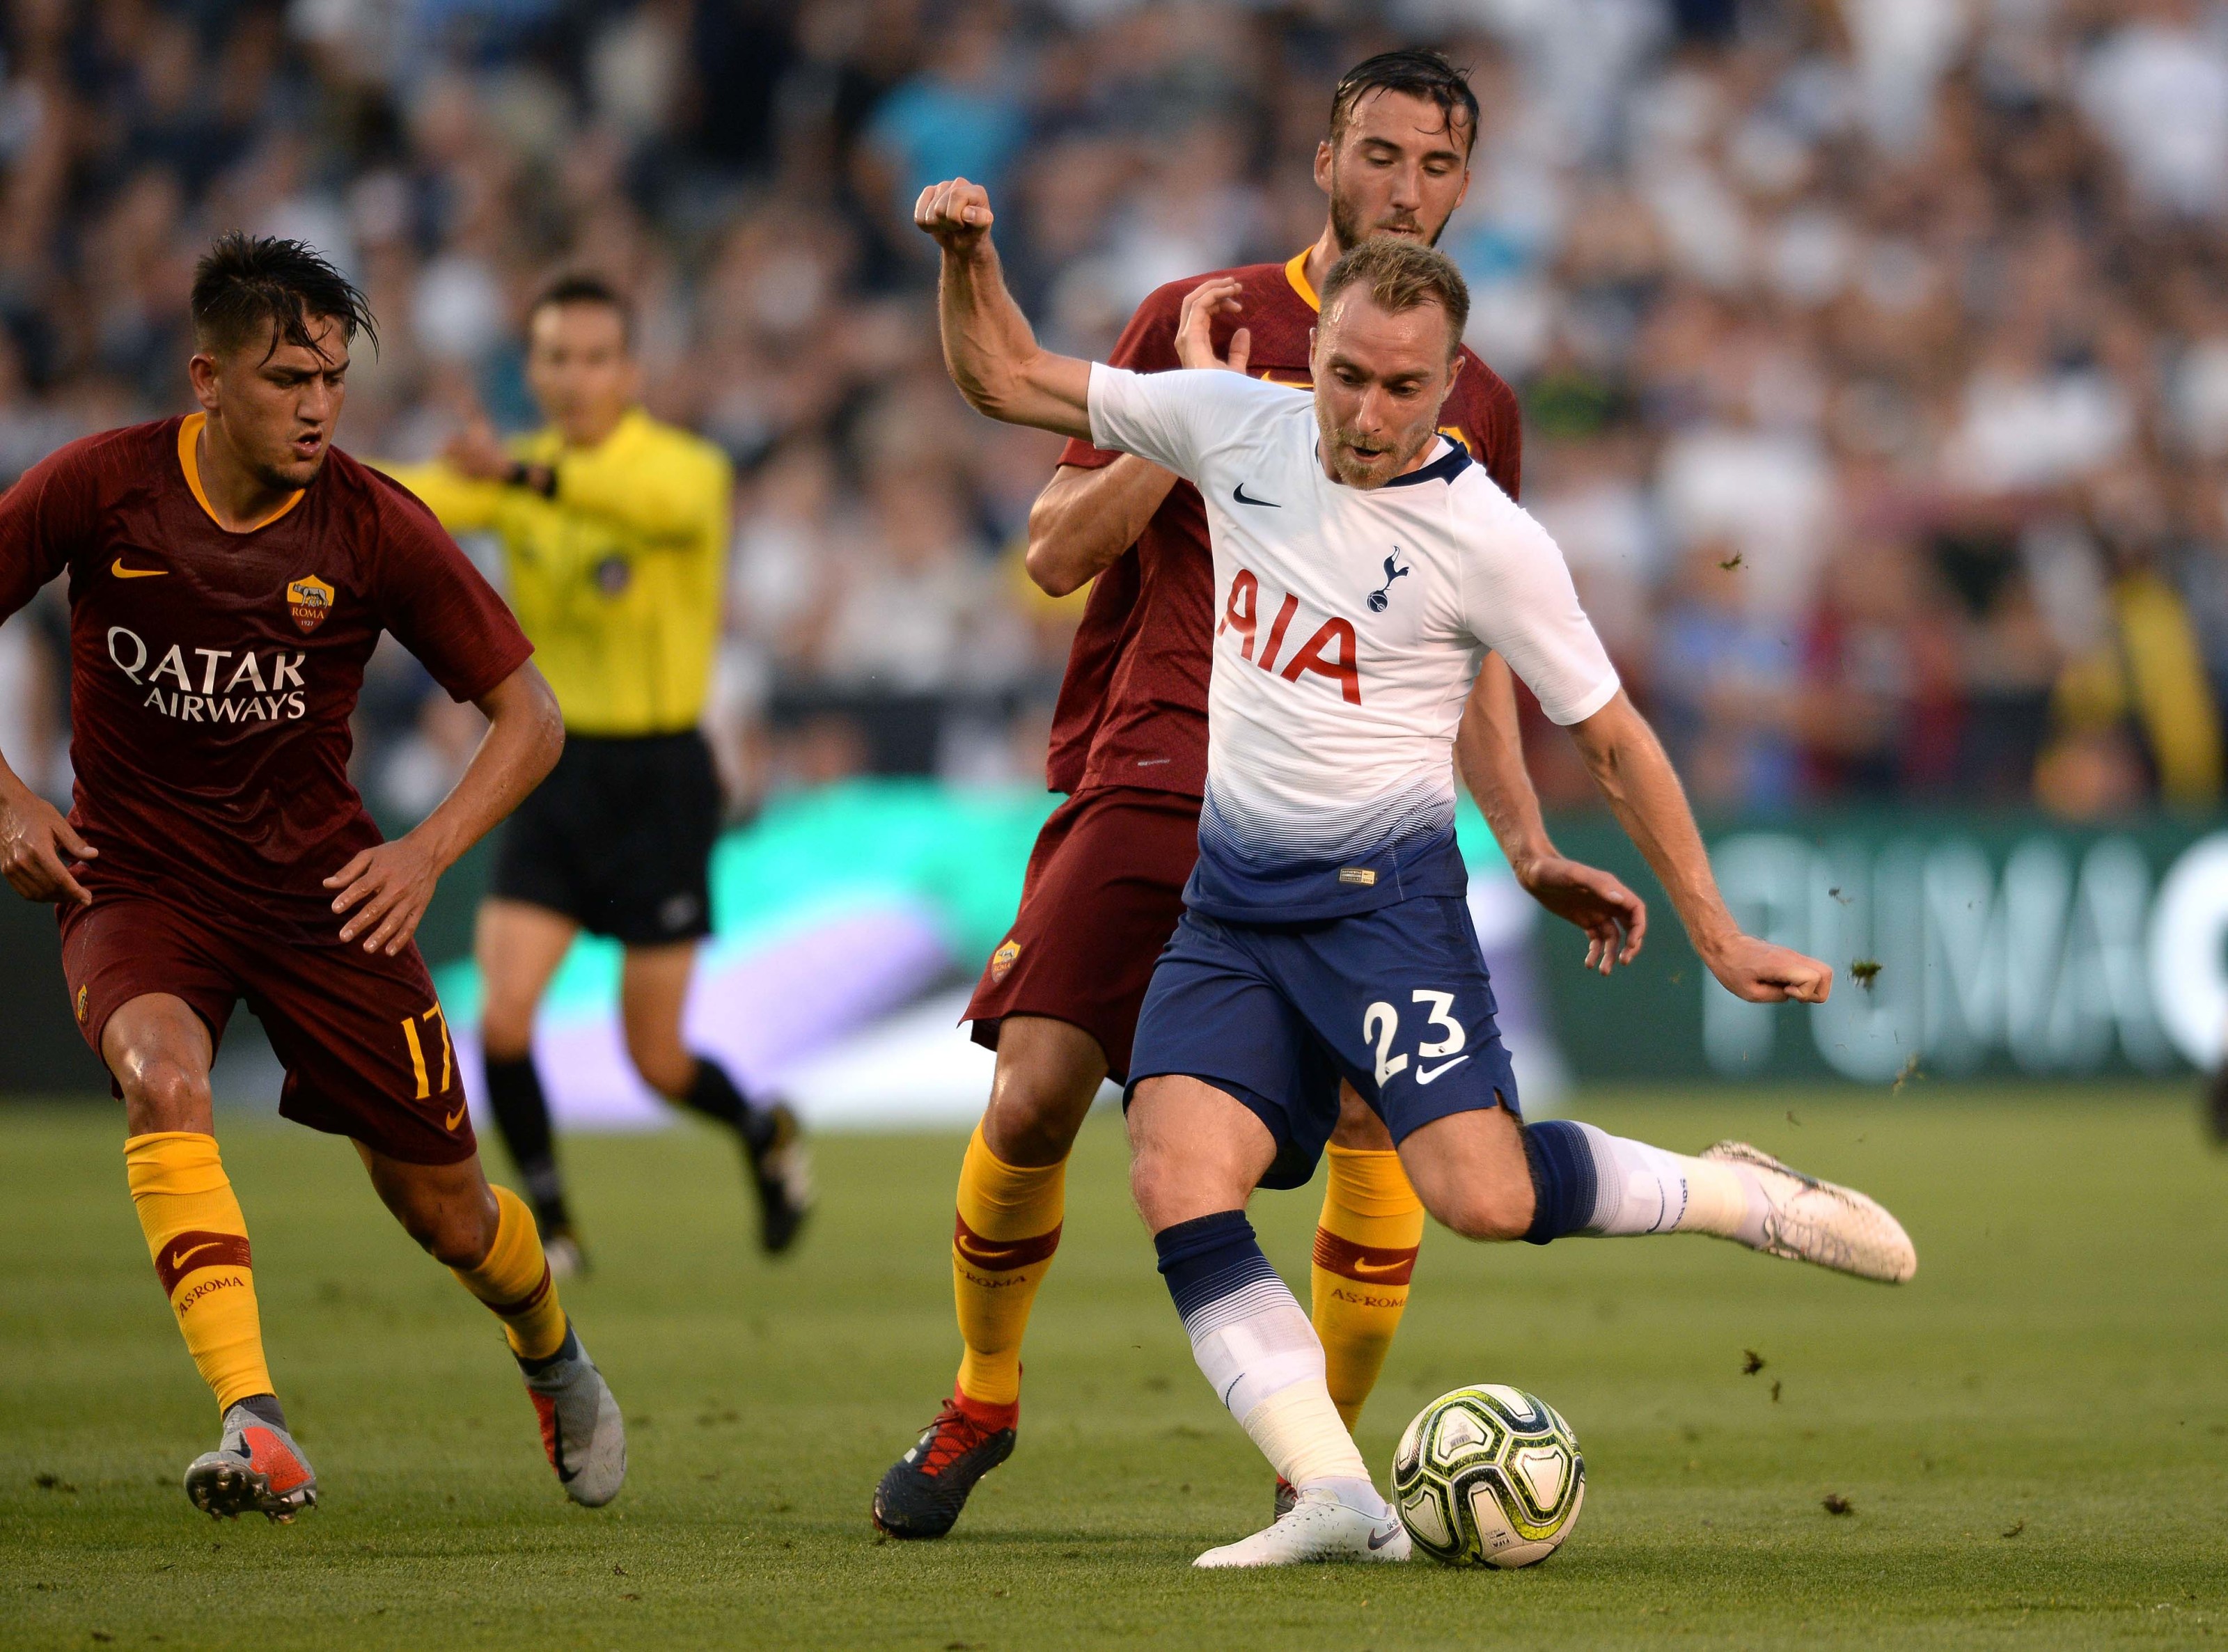 Tottenham 2017-18 player preview: Christian Eriksen out for more goals